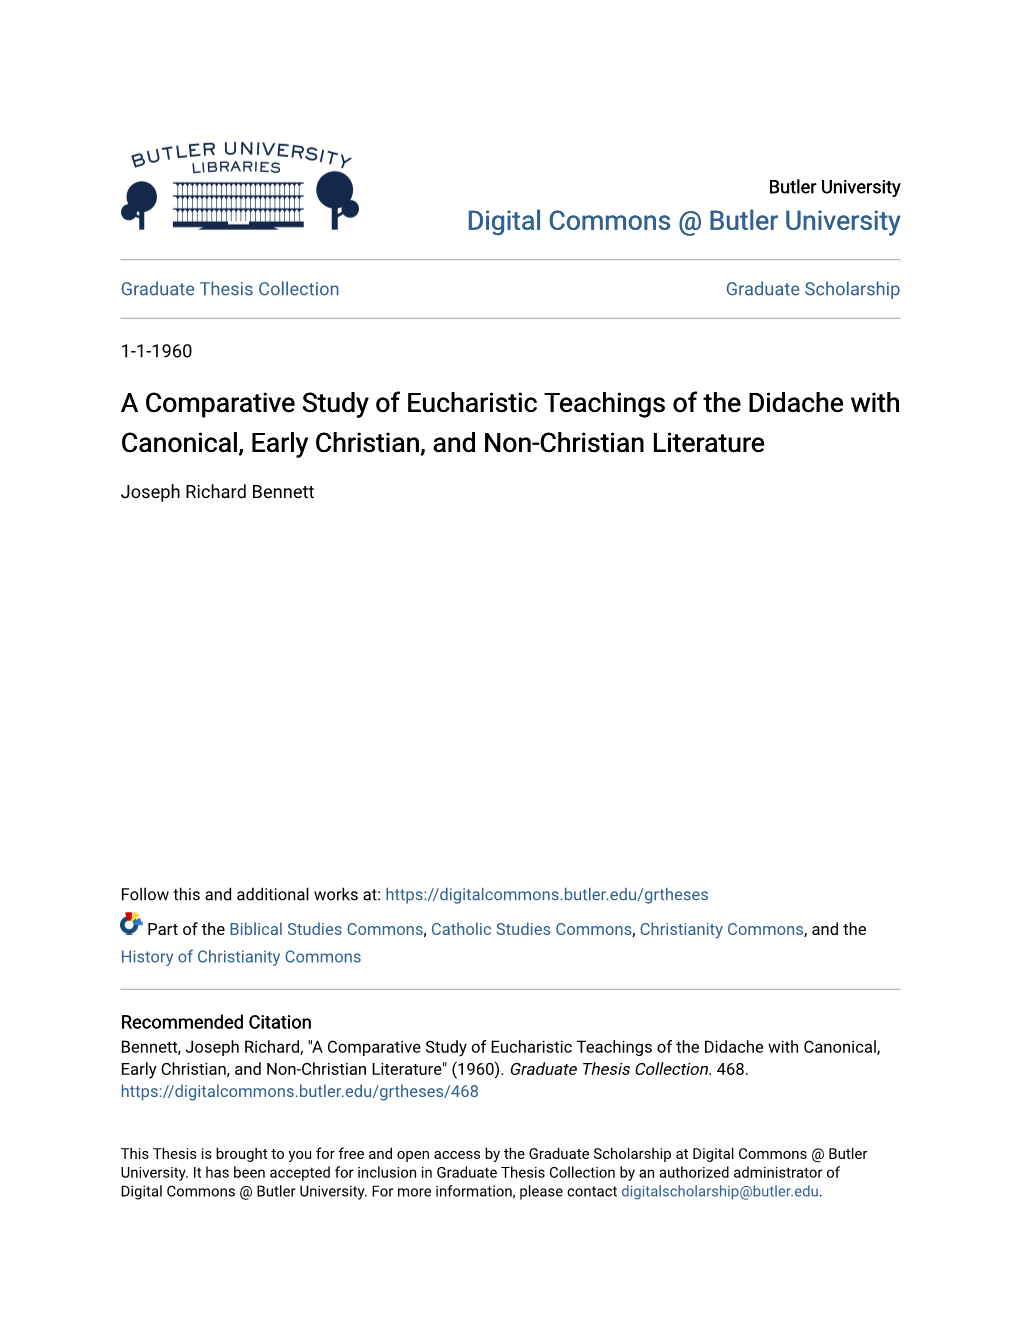 A Comparative Study of Eucharistic Teachings of the Didache with Canonical, Early Christian, and Non-Christian Literature